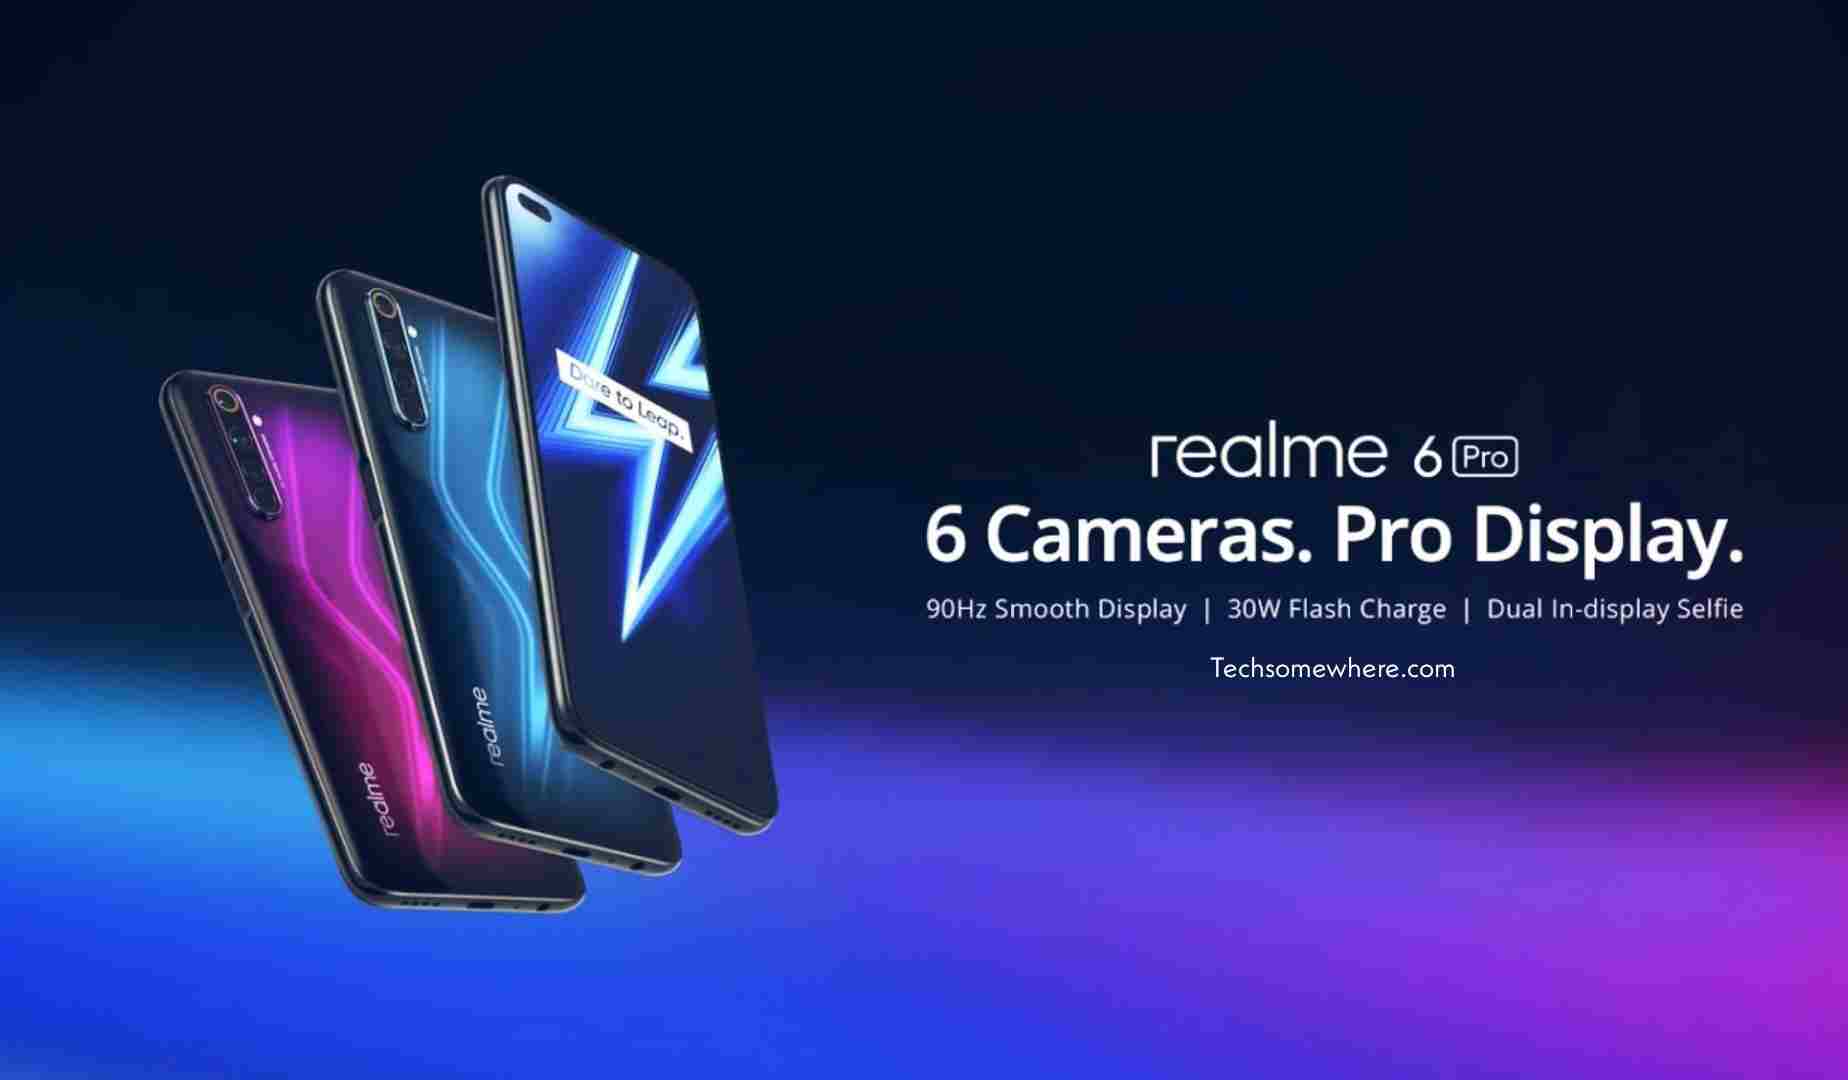 Realme 6 Pro - Full Specifications, Price & Release Date 2022